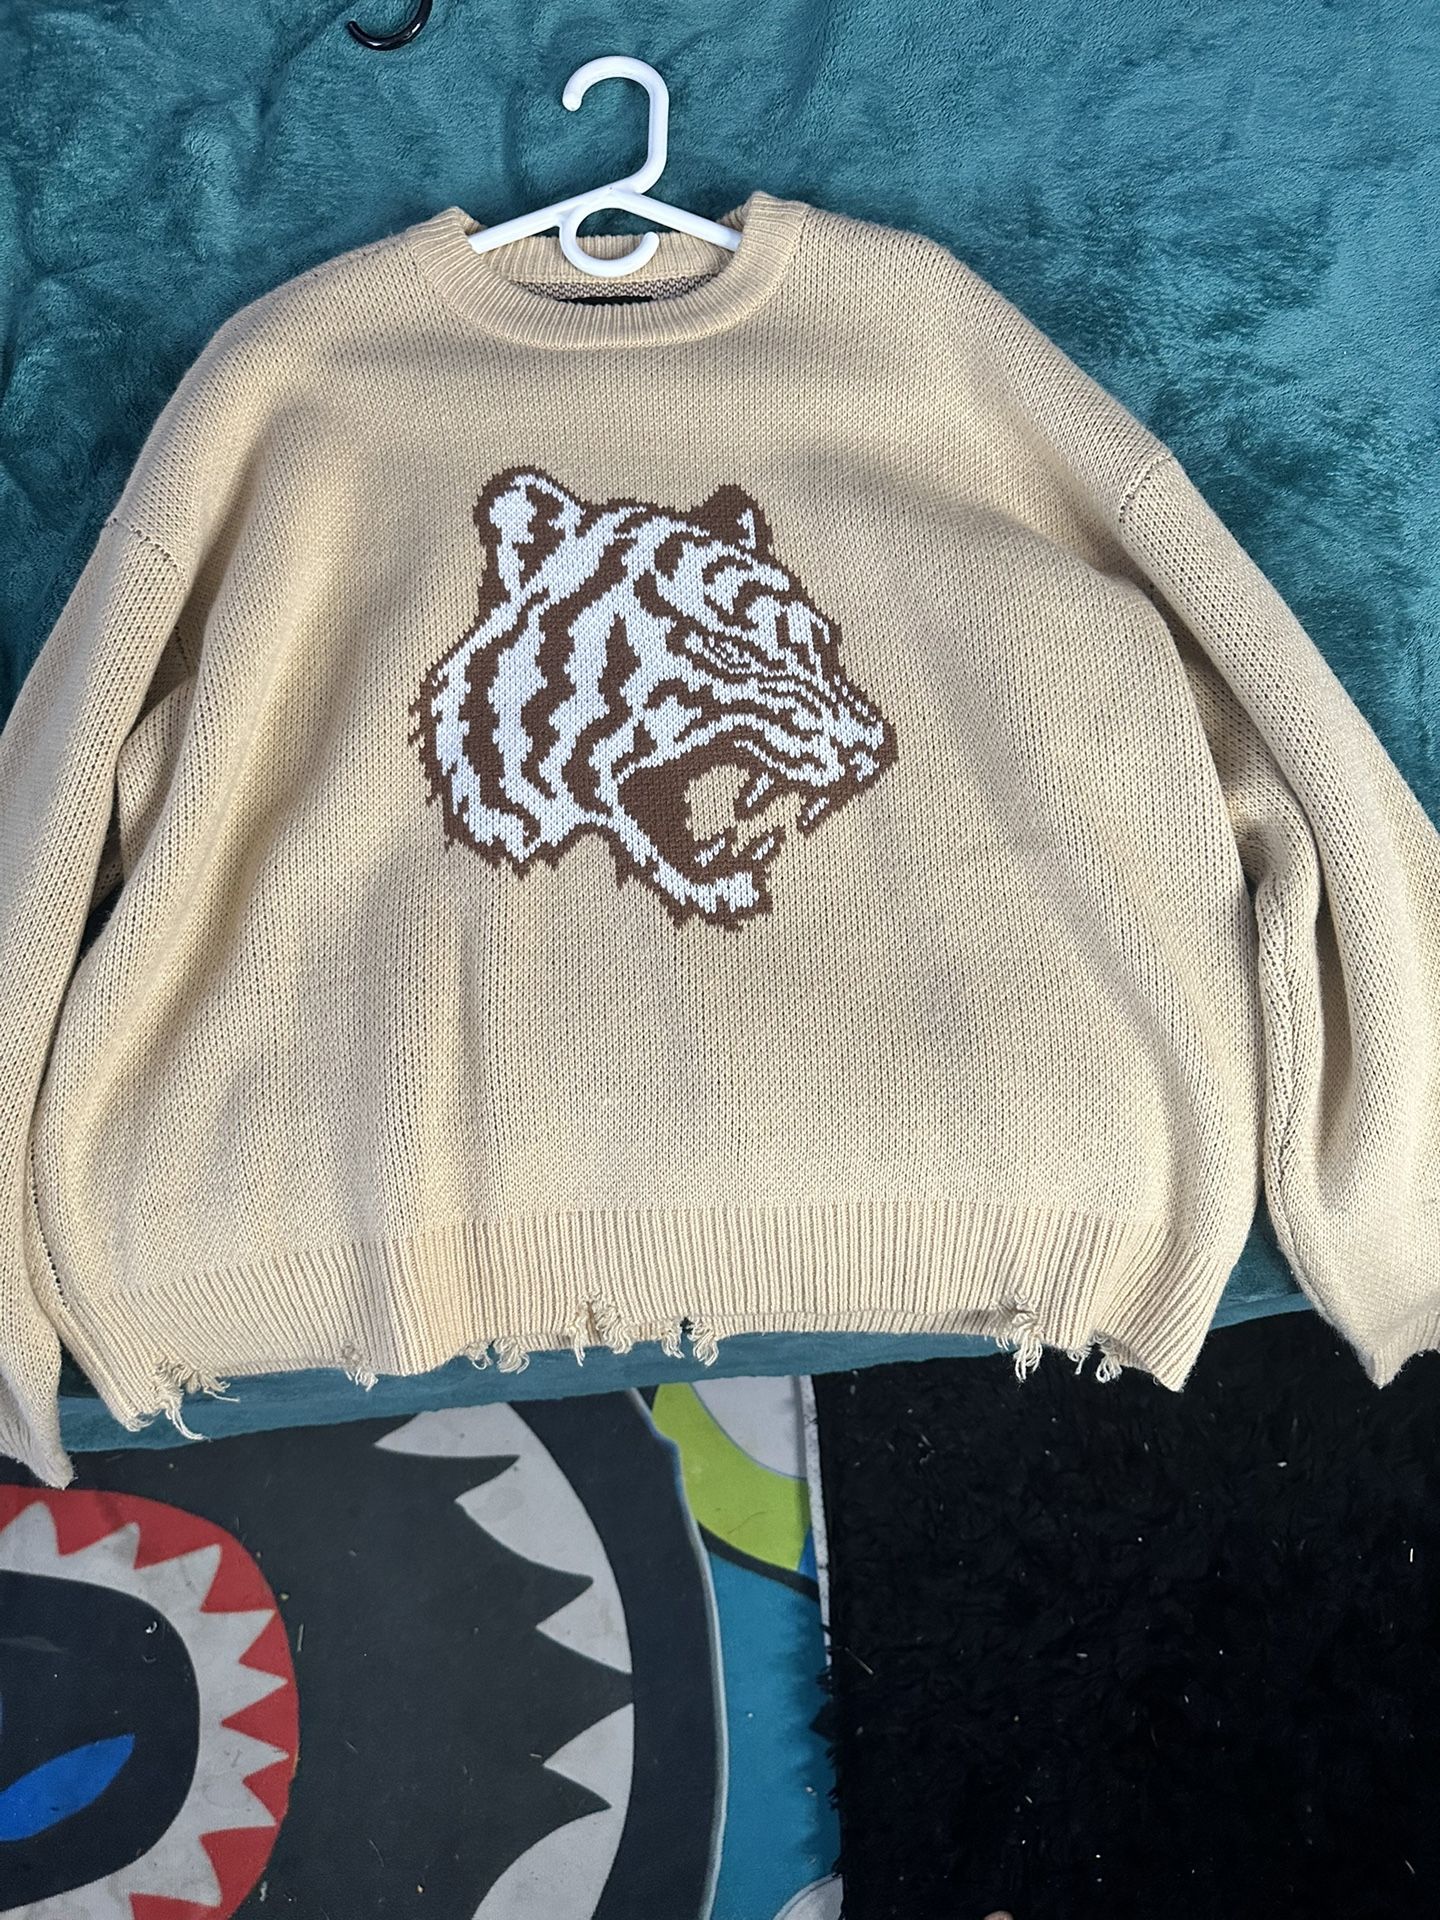 PacSun Men's Destroyed Cropped Tiger Crewneck Sweater (Sz Small)